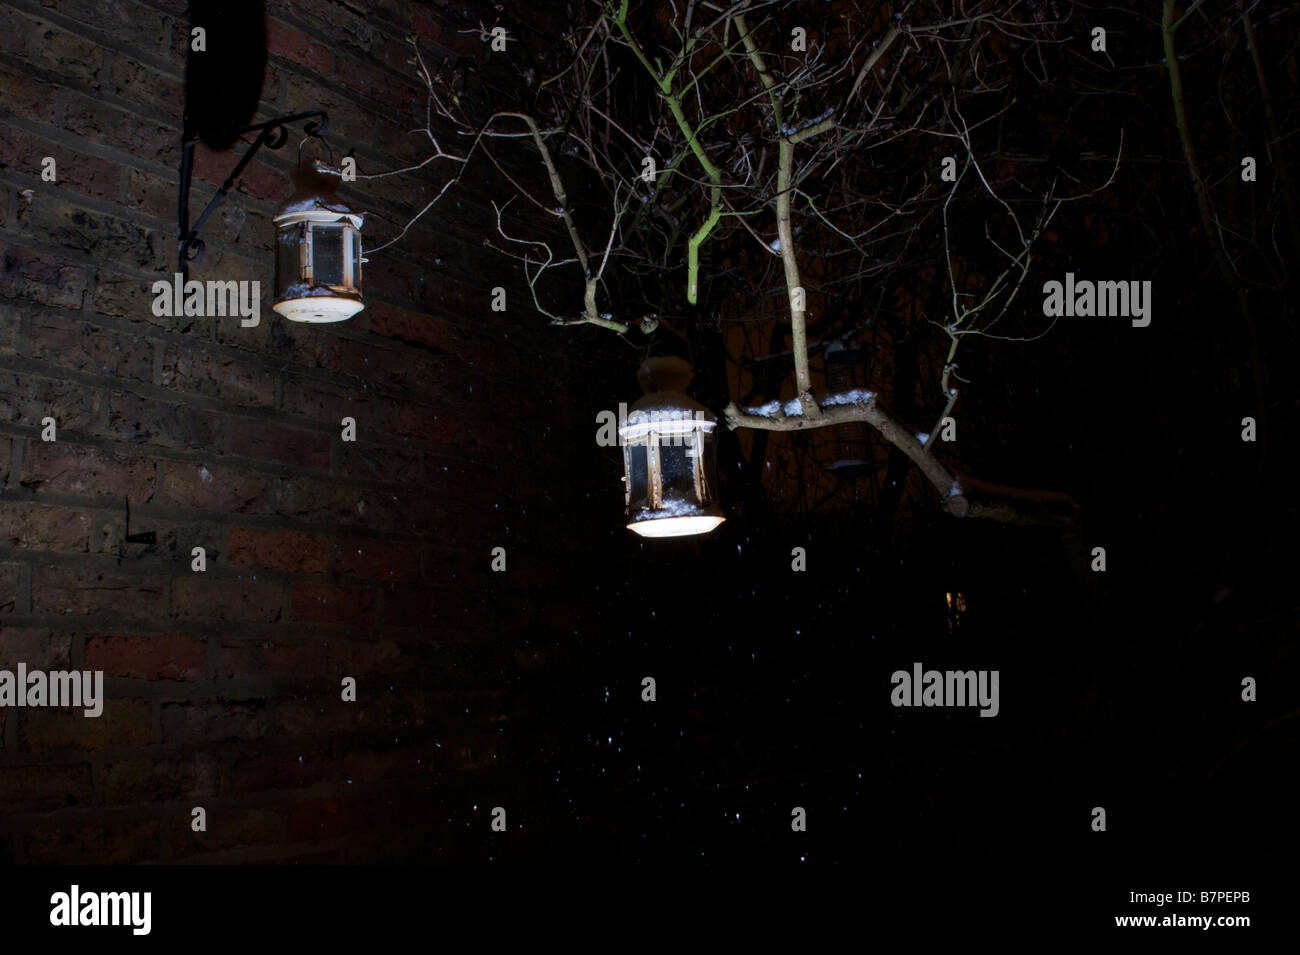 Two lamps haning from a tree during a snowy night Stock Photo